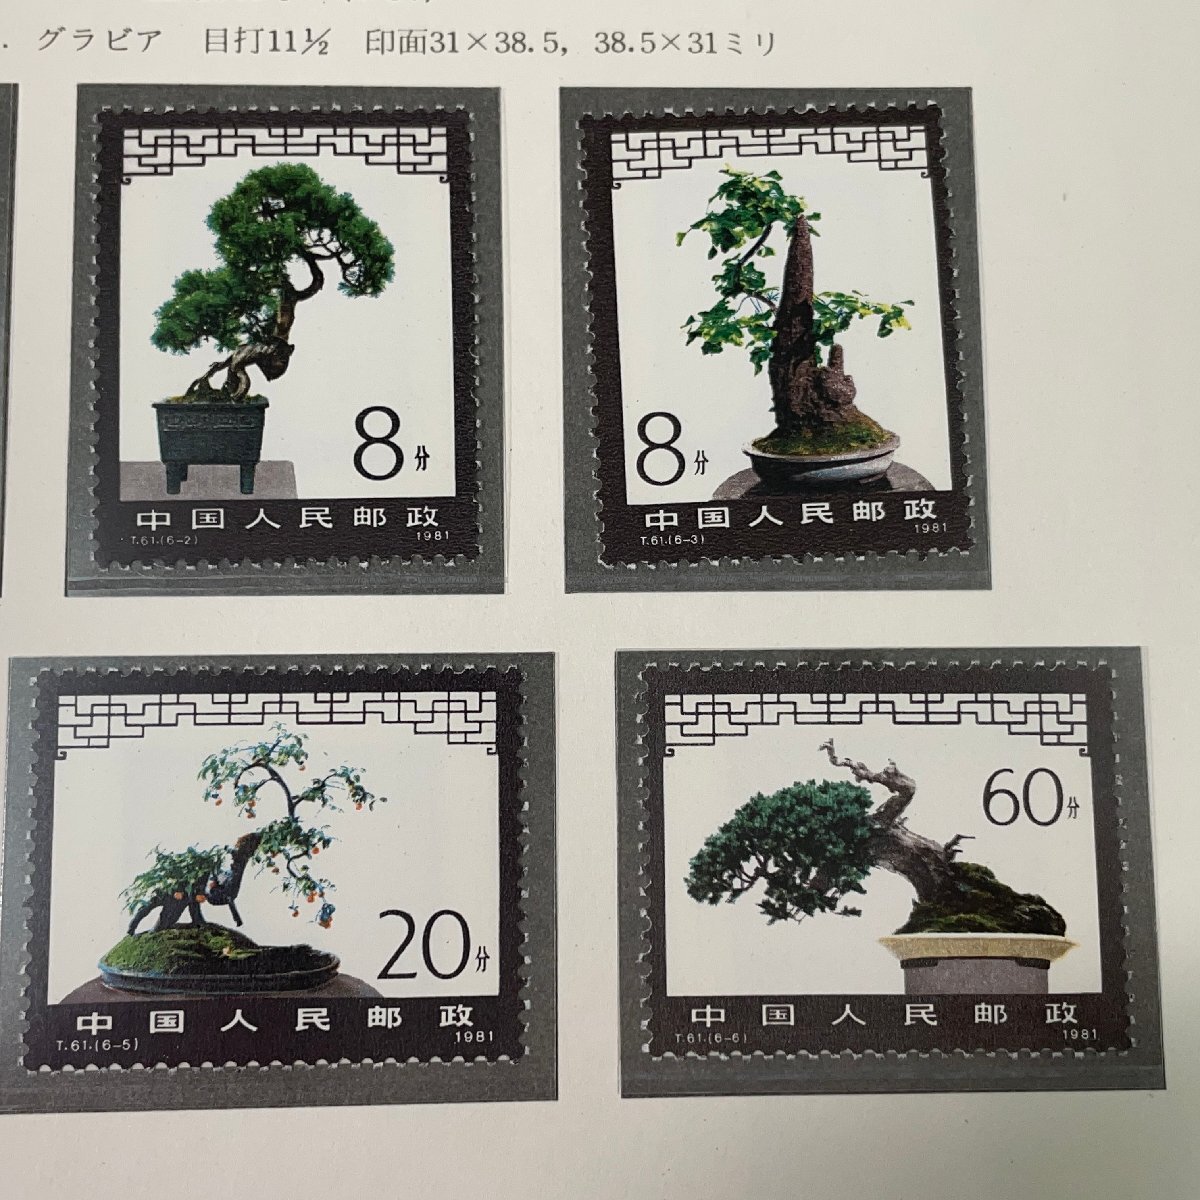 m002 C3(10) 34 China stamp postage 385 jpy storage goods T61 bonsai stamp T63.. cow. stamp 1981 year each 6 kind . Boss to-k leaf attaching 